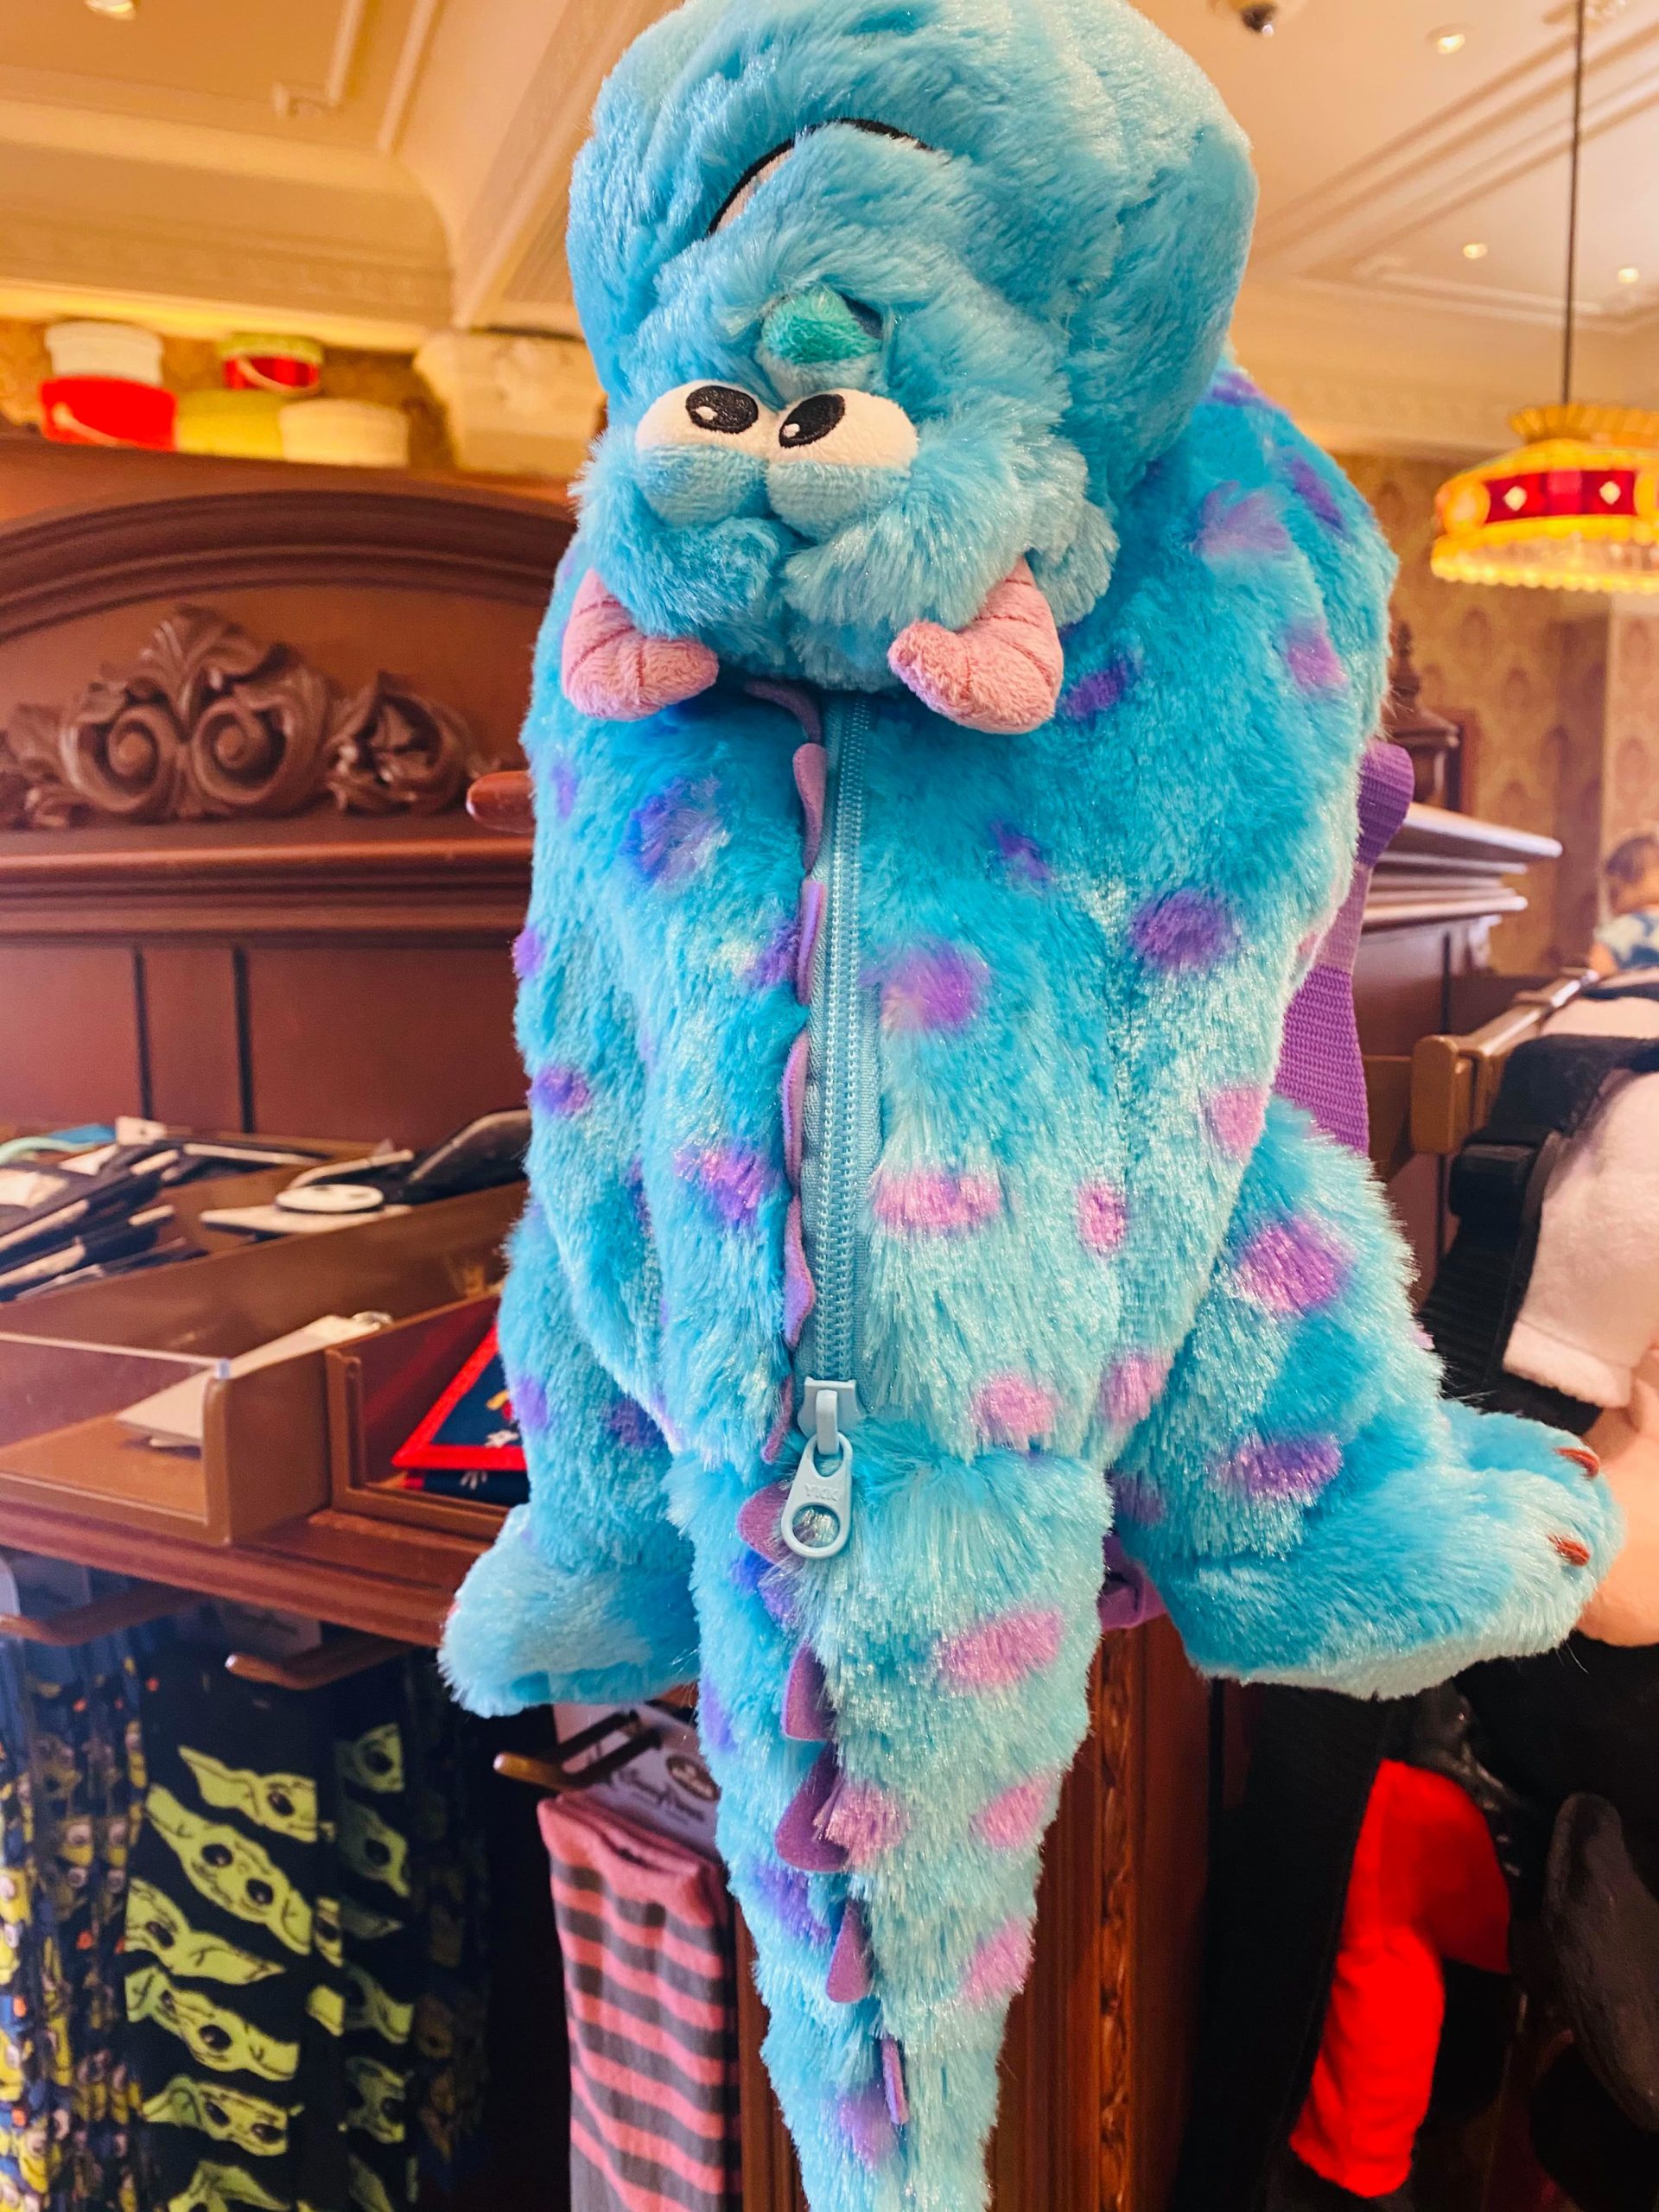 These NEW Character Plush Fanny Packs Are Adorable - MickeyBlog.com